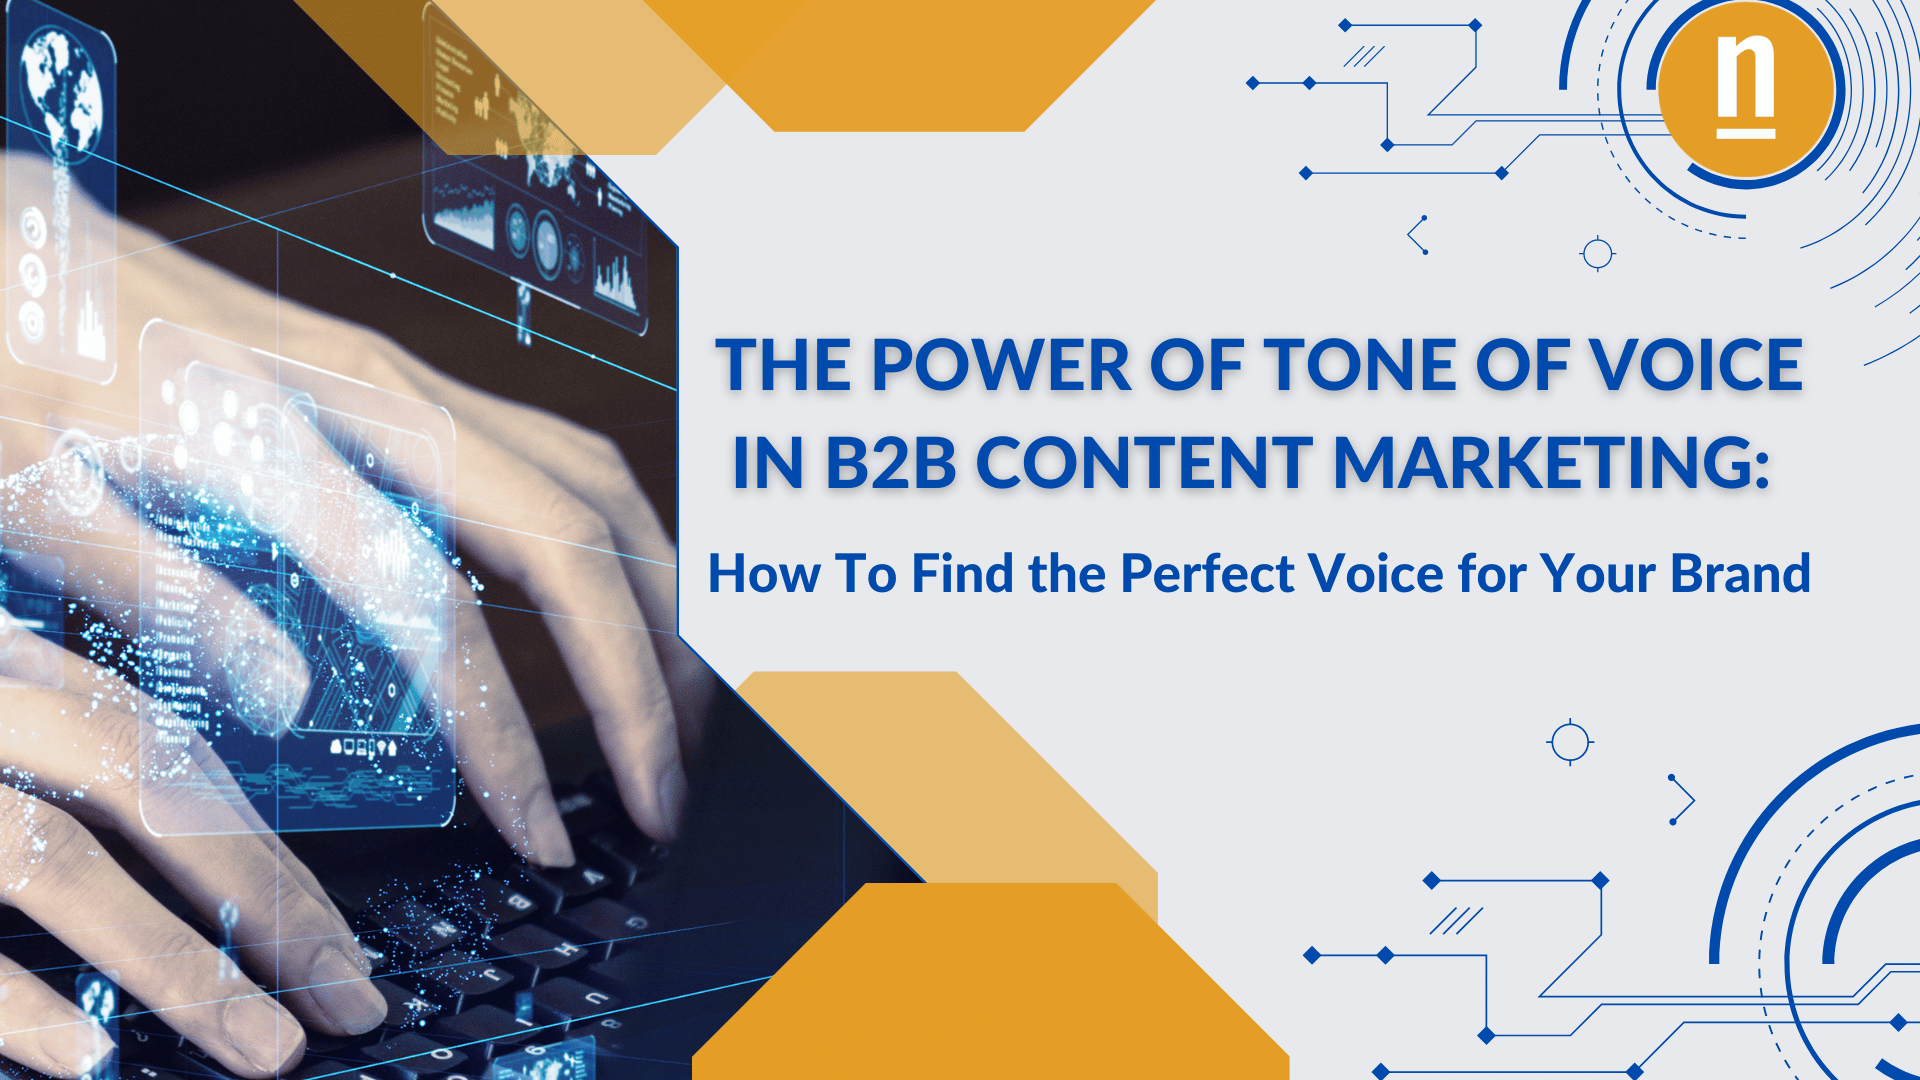 How to define your brand's tone of voice strategically